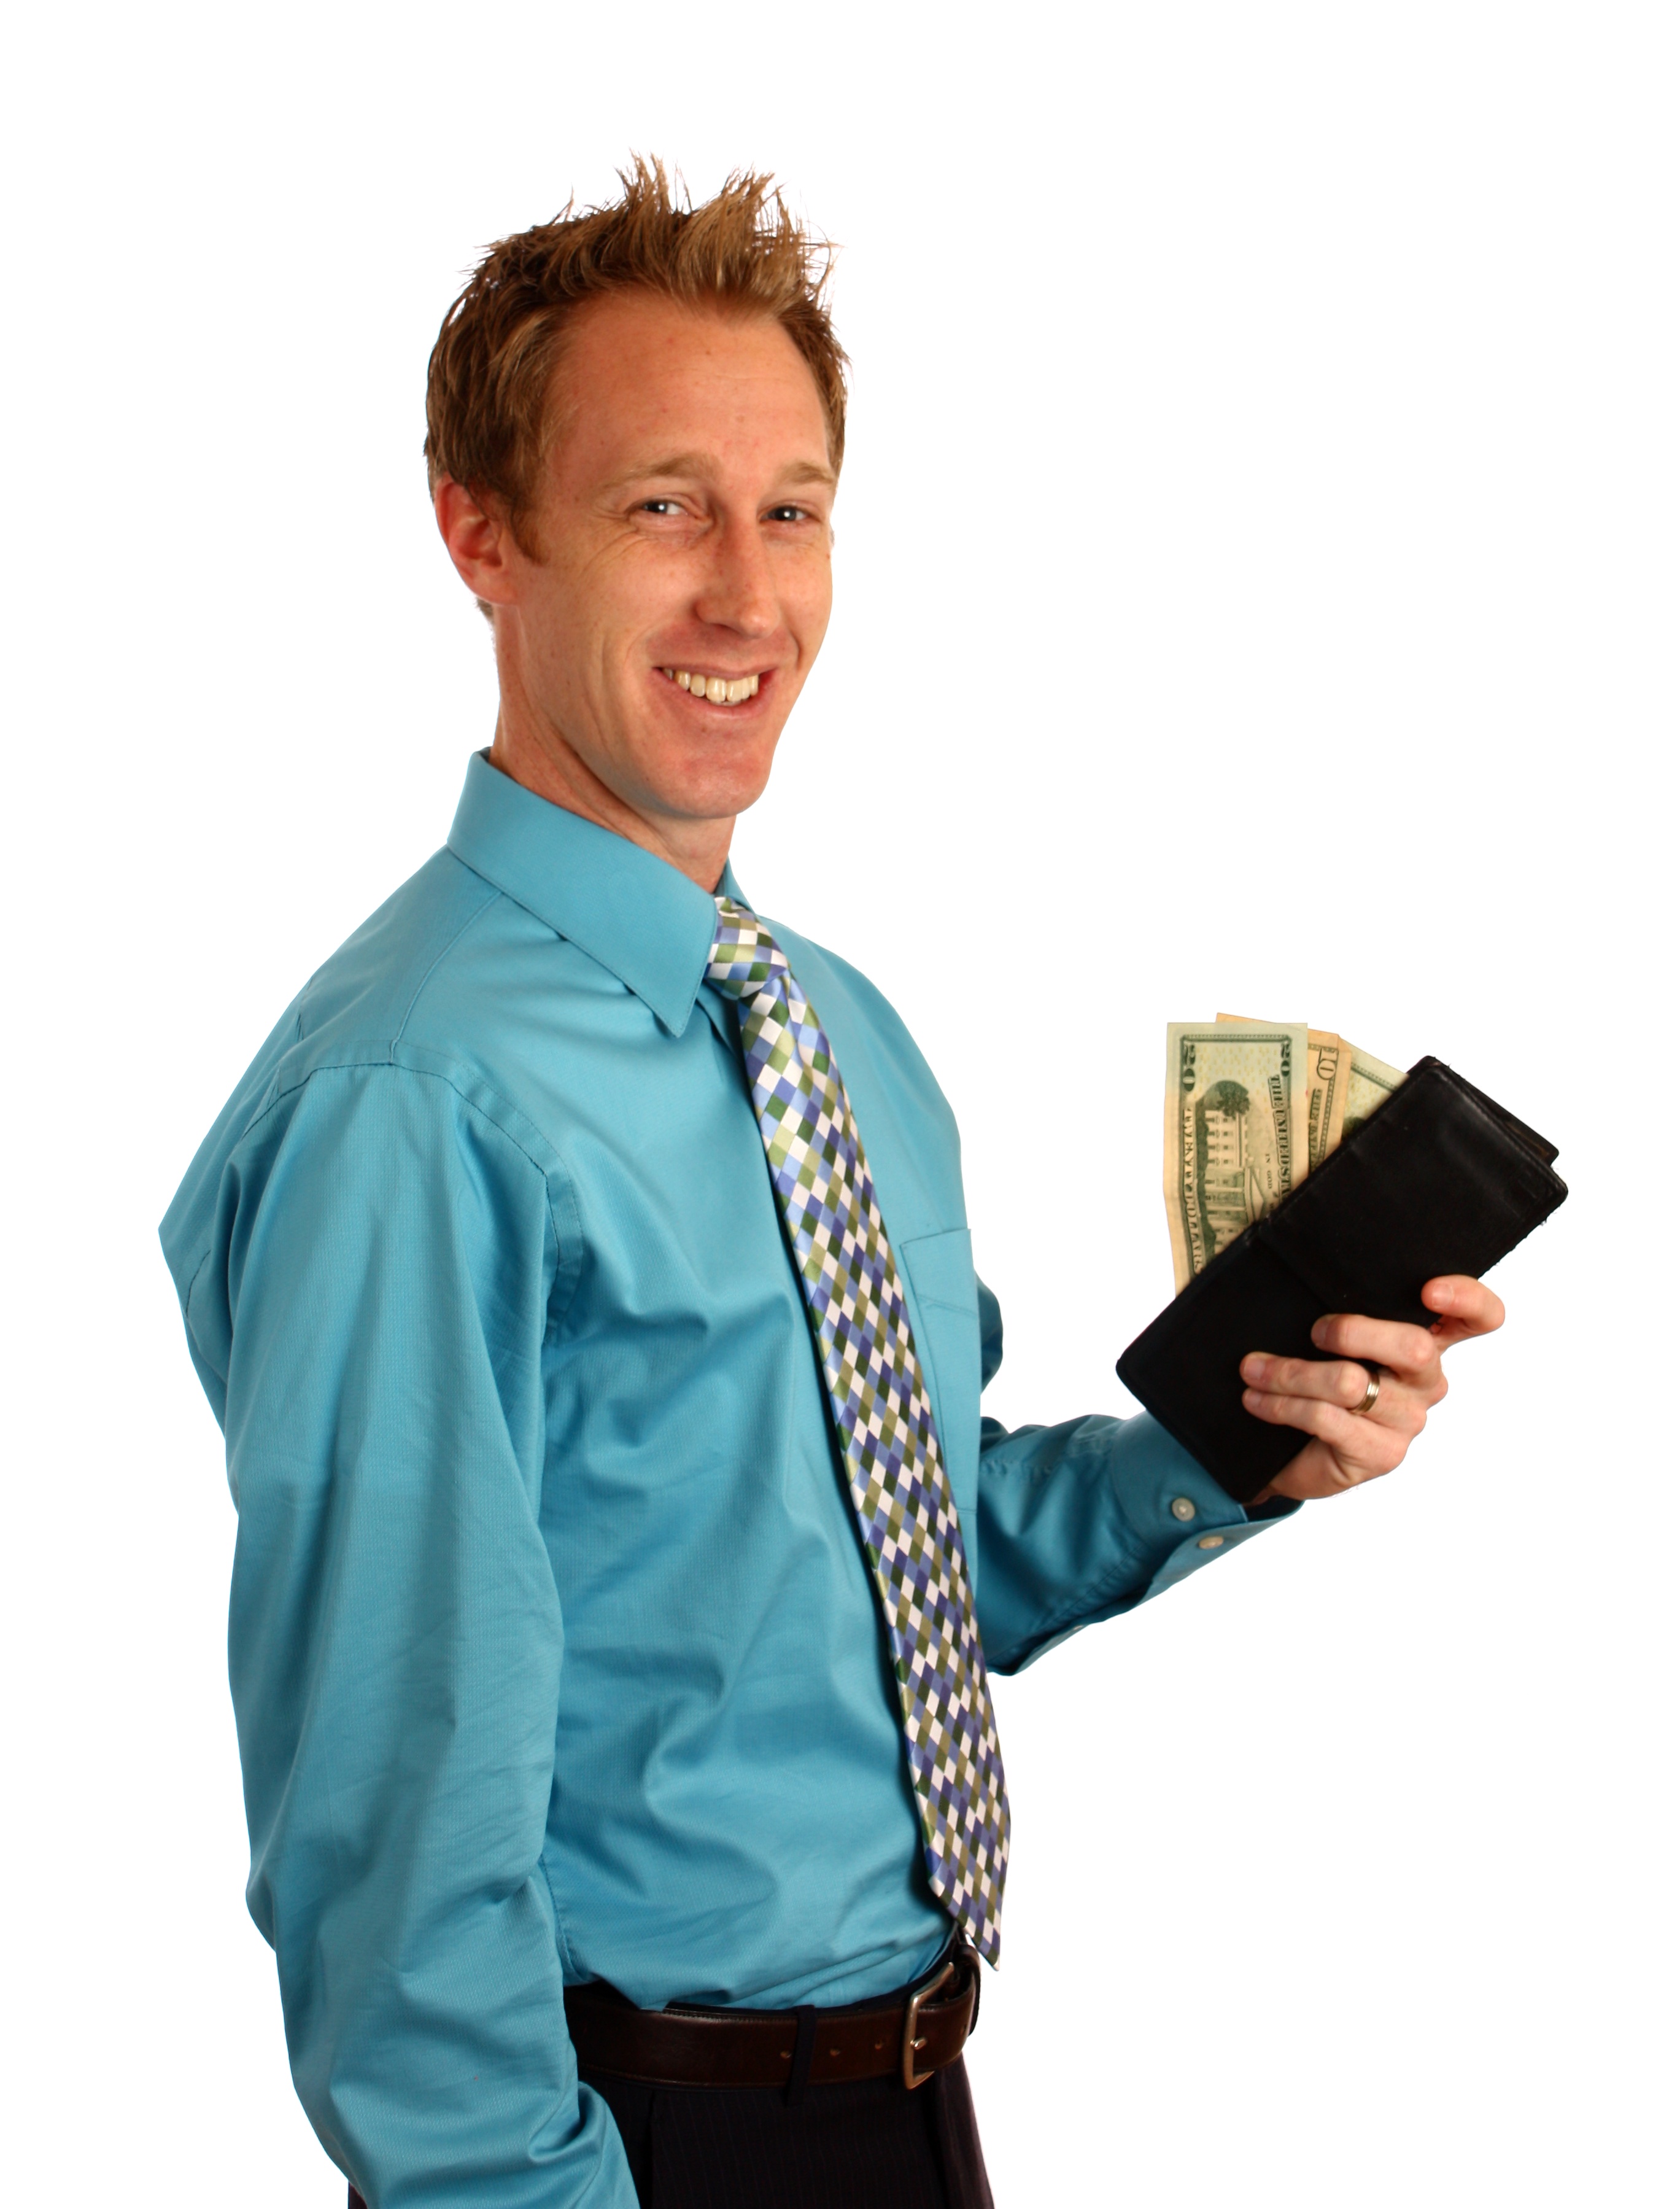 A businessman holding a wallet, Bills, Objects, Ties, Shirts, HQ Photo